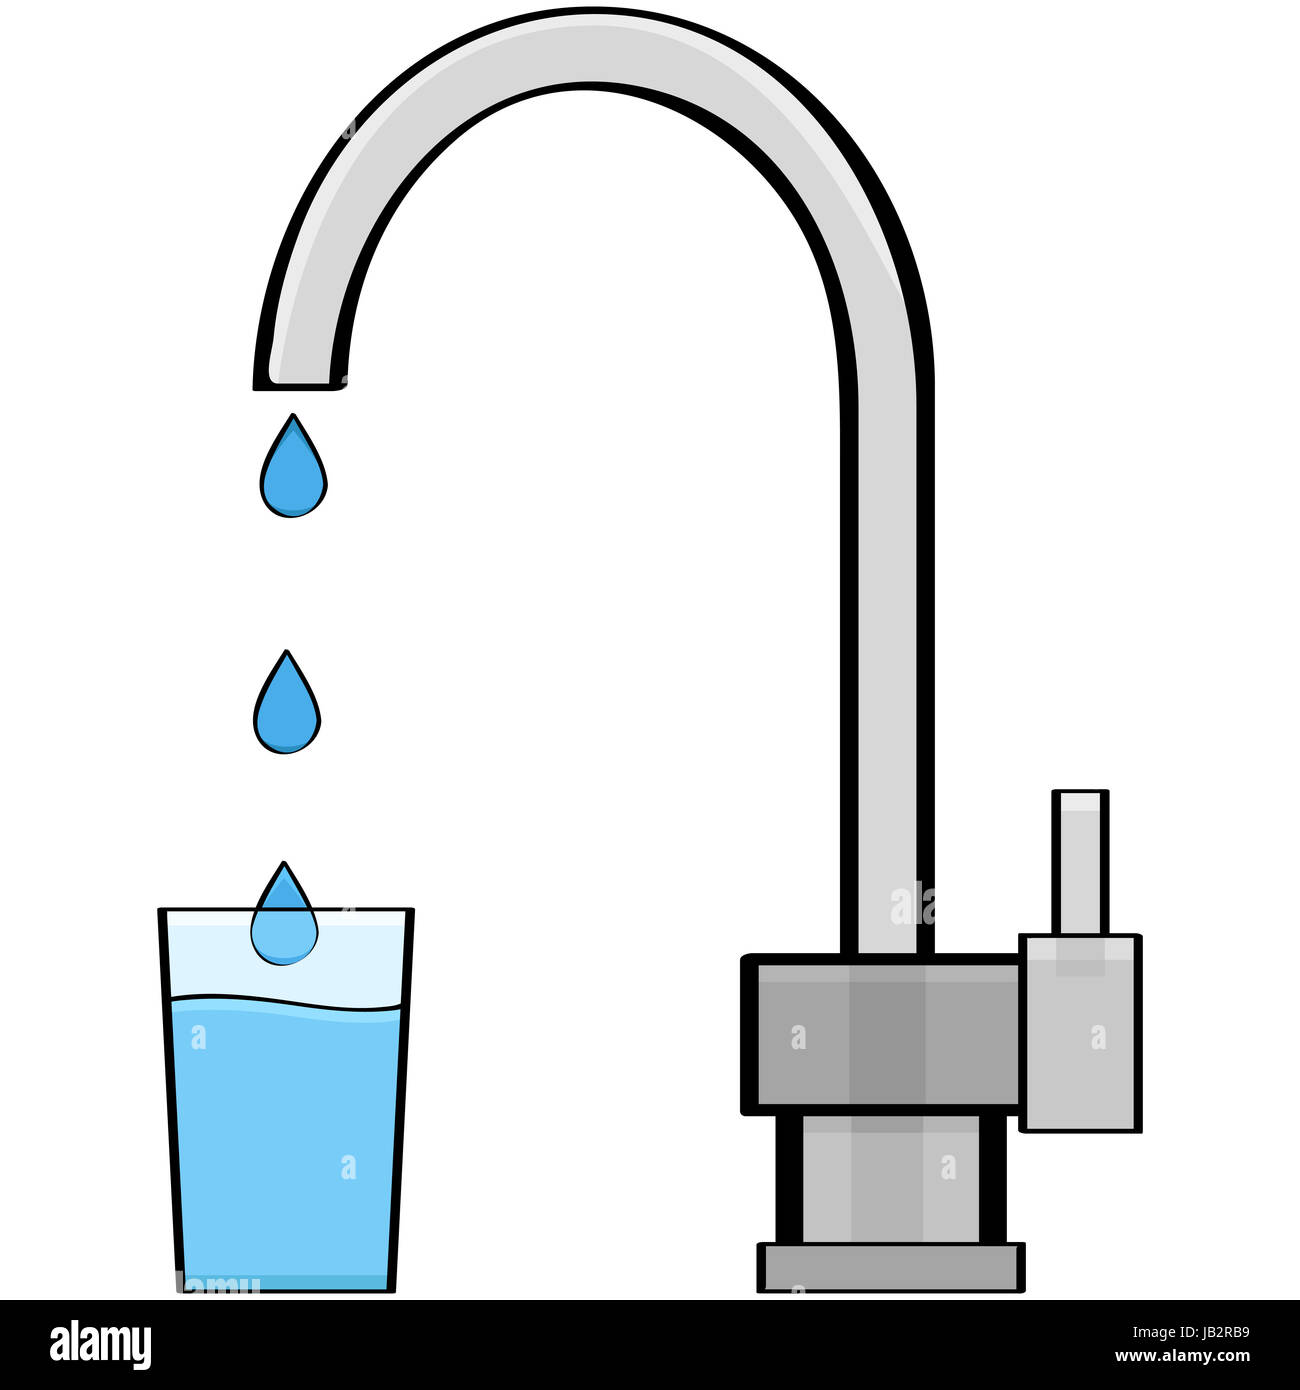 Cartoon illustration showing water coming out of a tap and into a glass  Stock Photo - Alamy